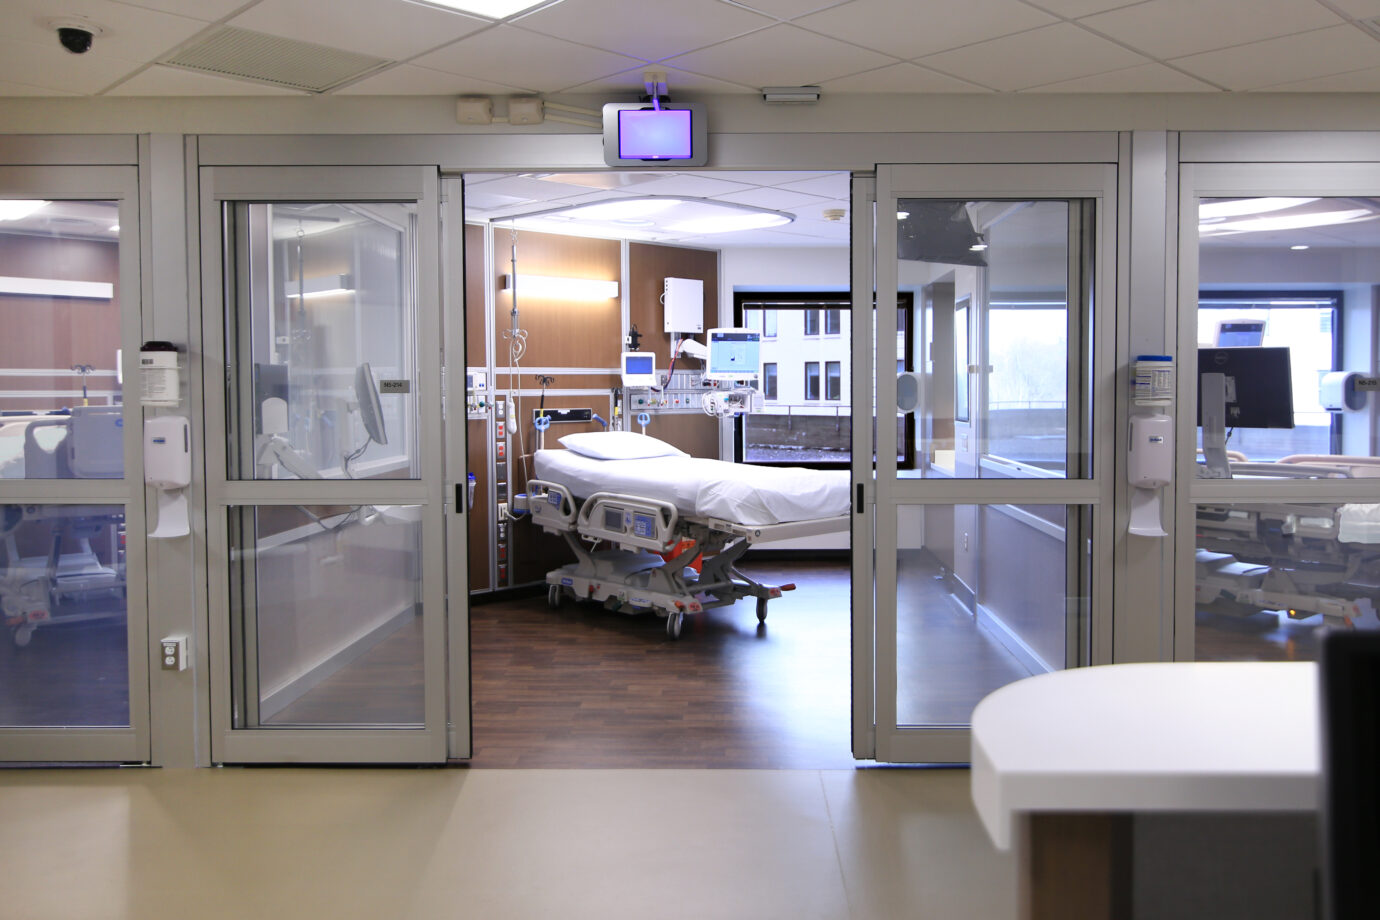 ICU Featuring Ecosurfaces Cosmos RX and Forest RX